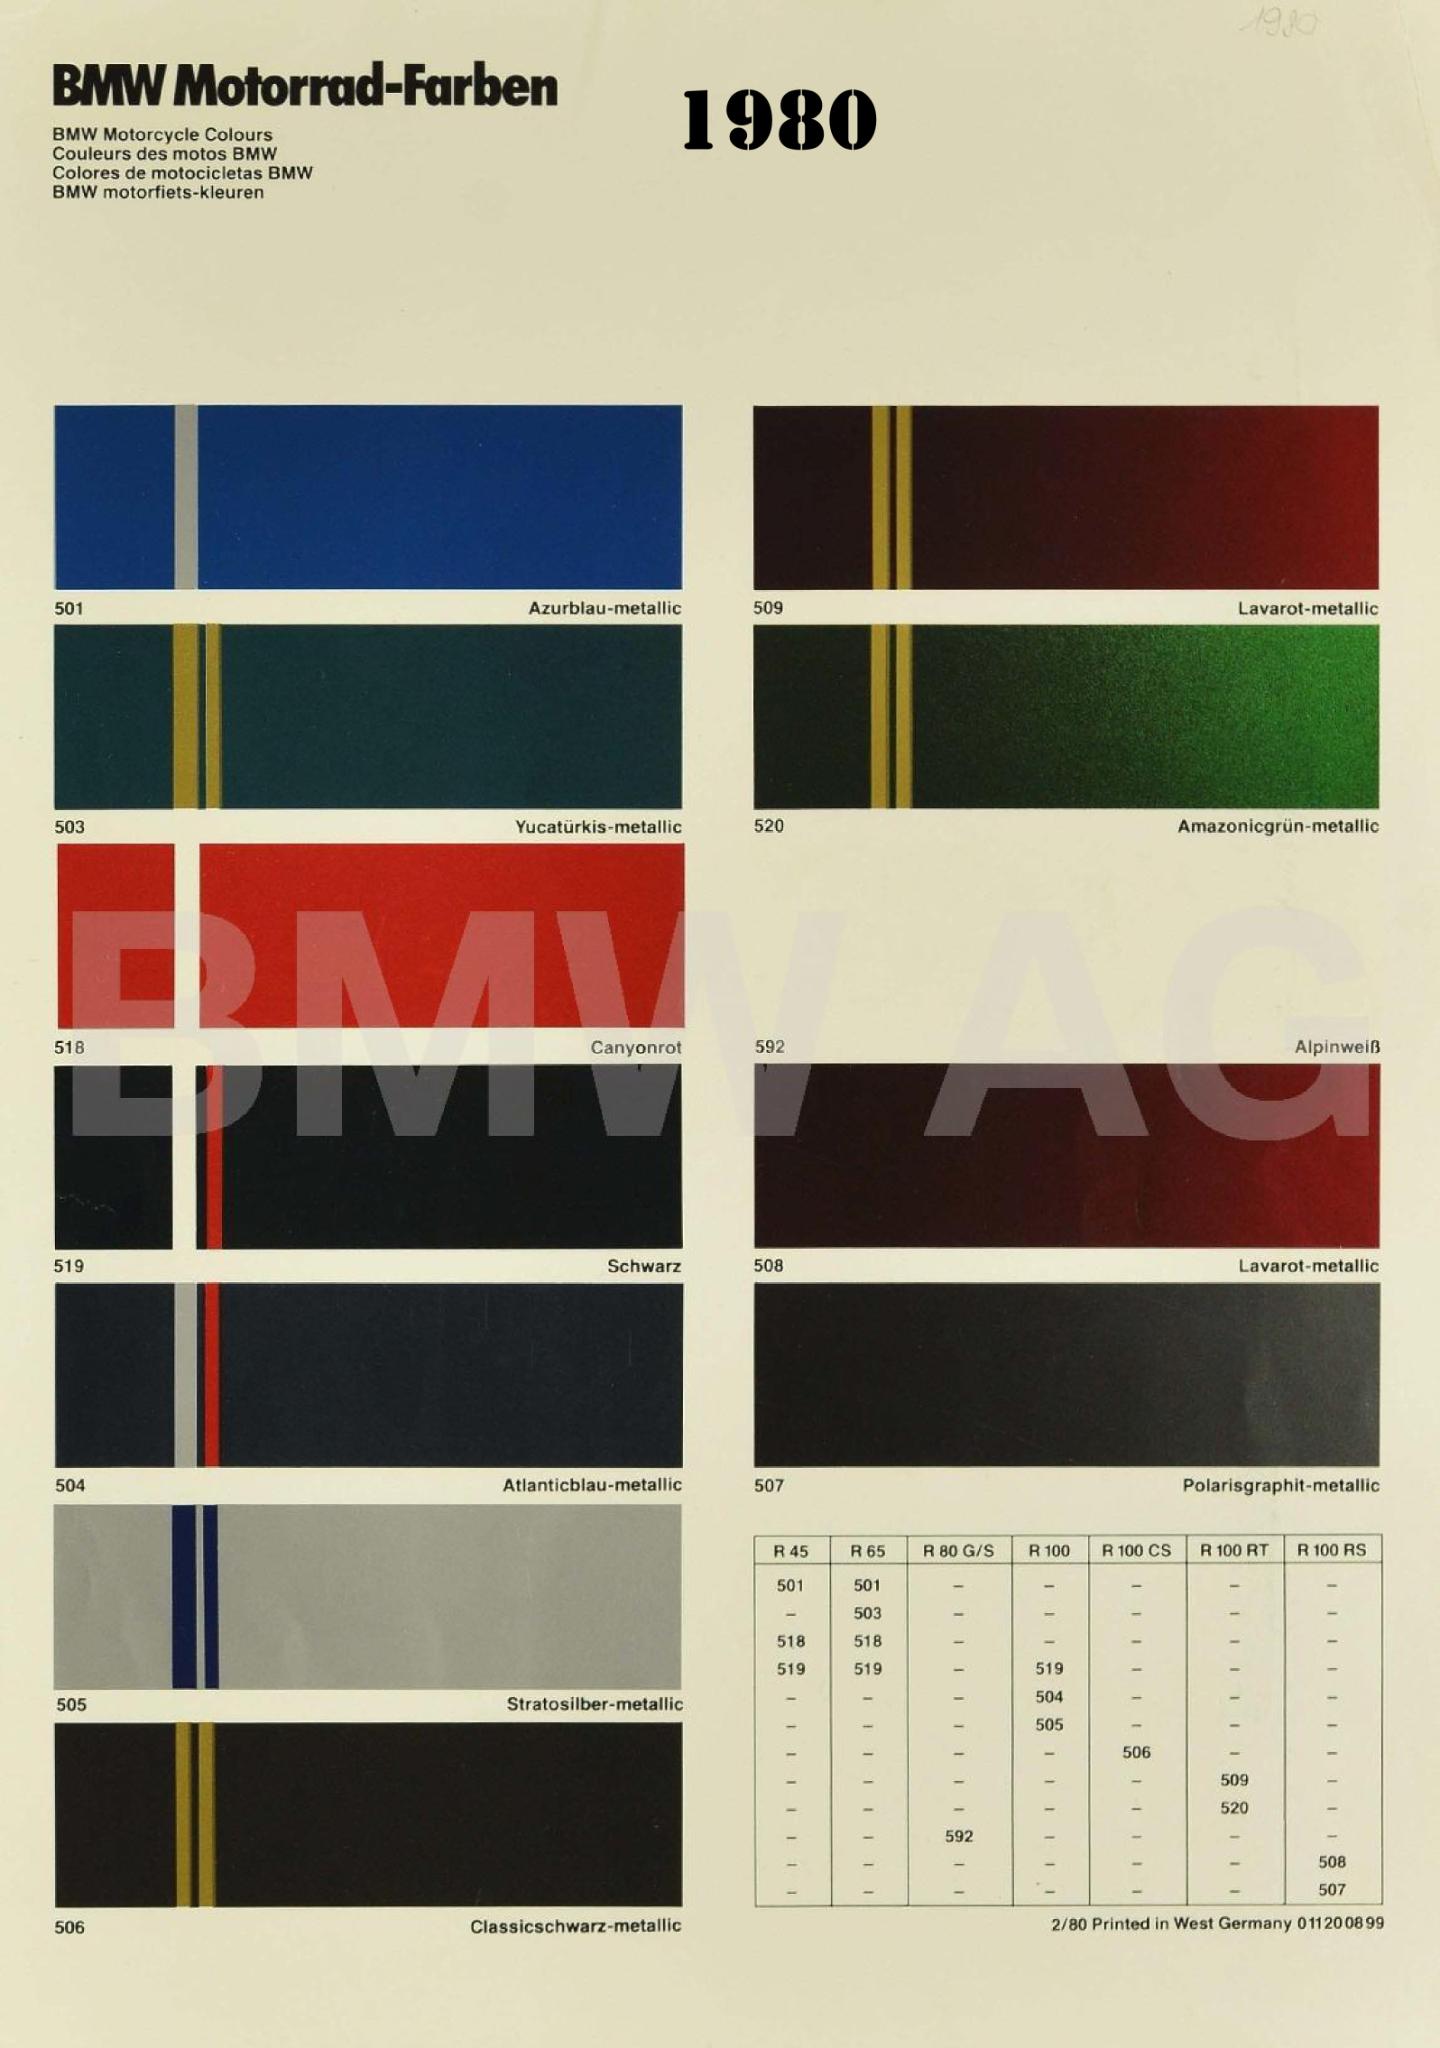 Colors used on BMW Motorcycles in 1980